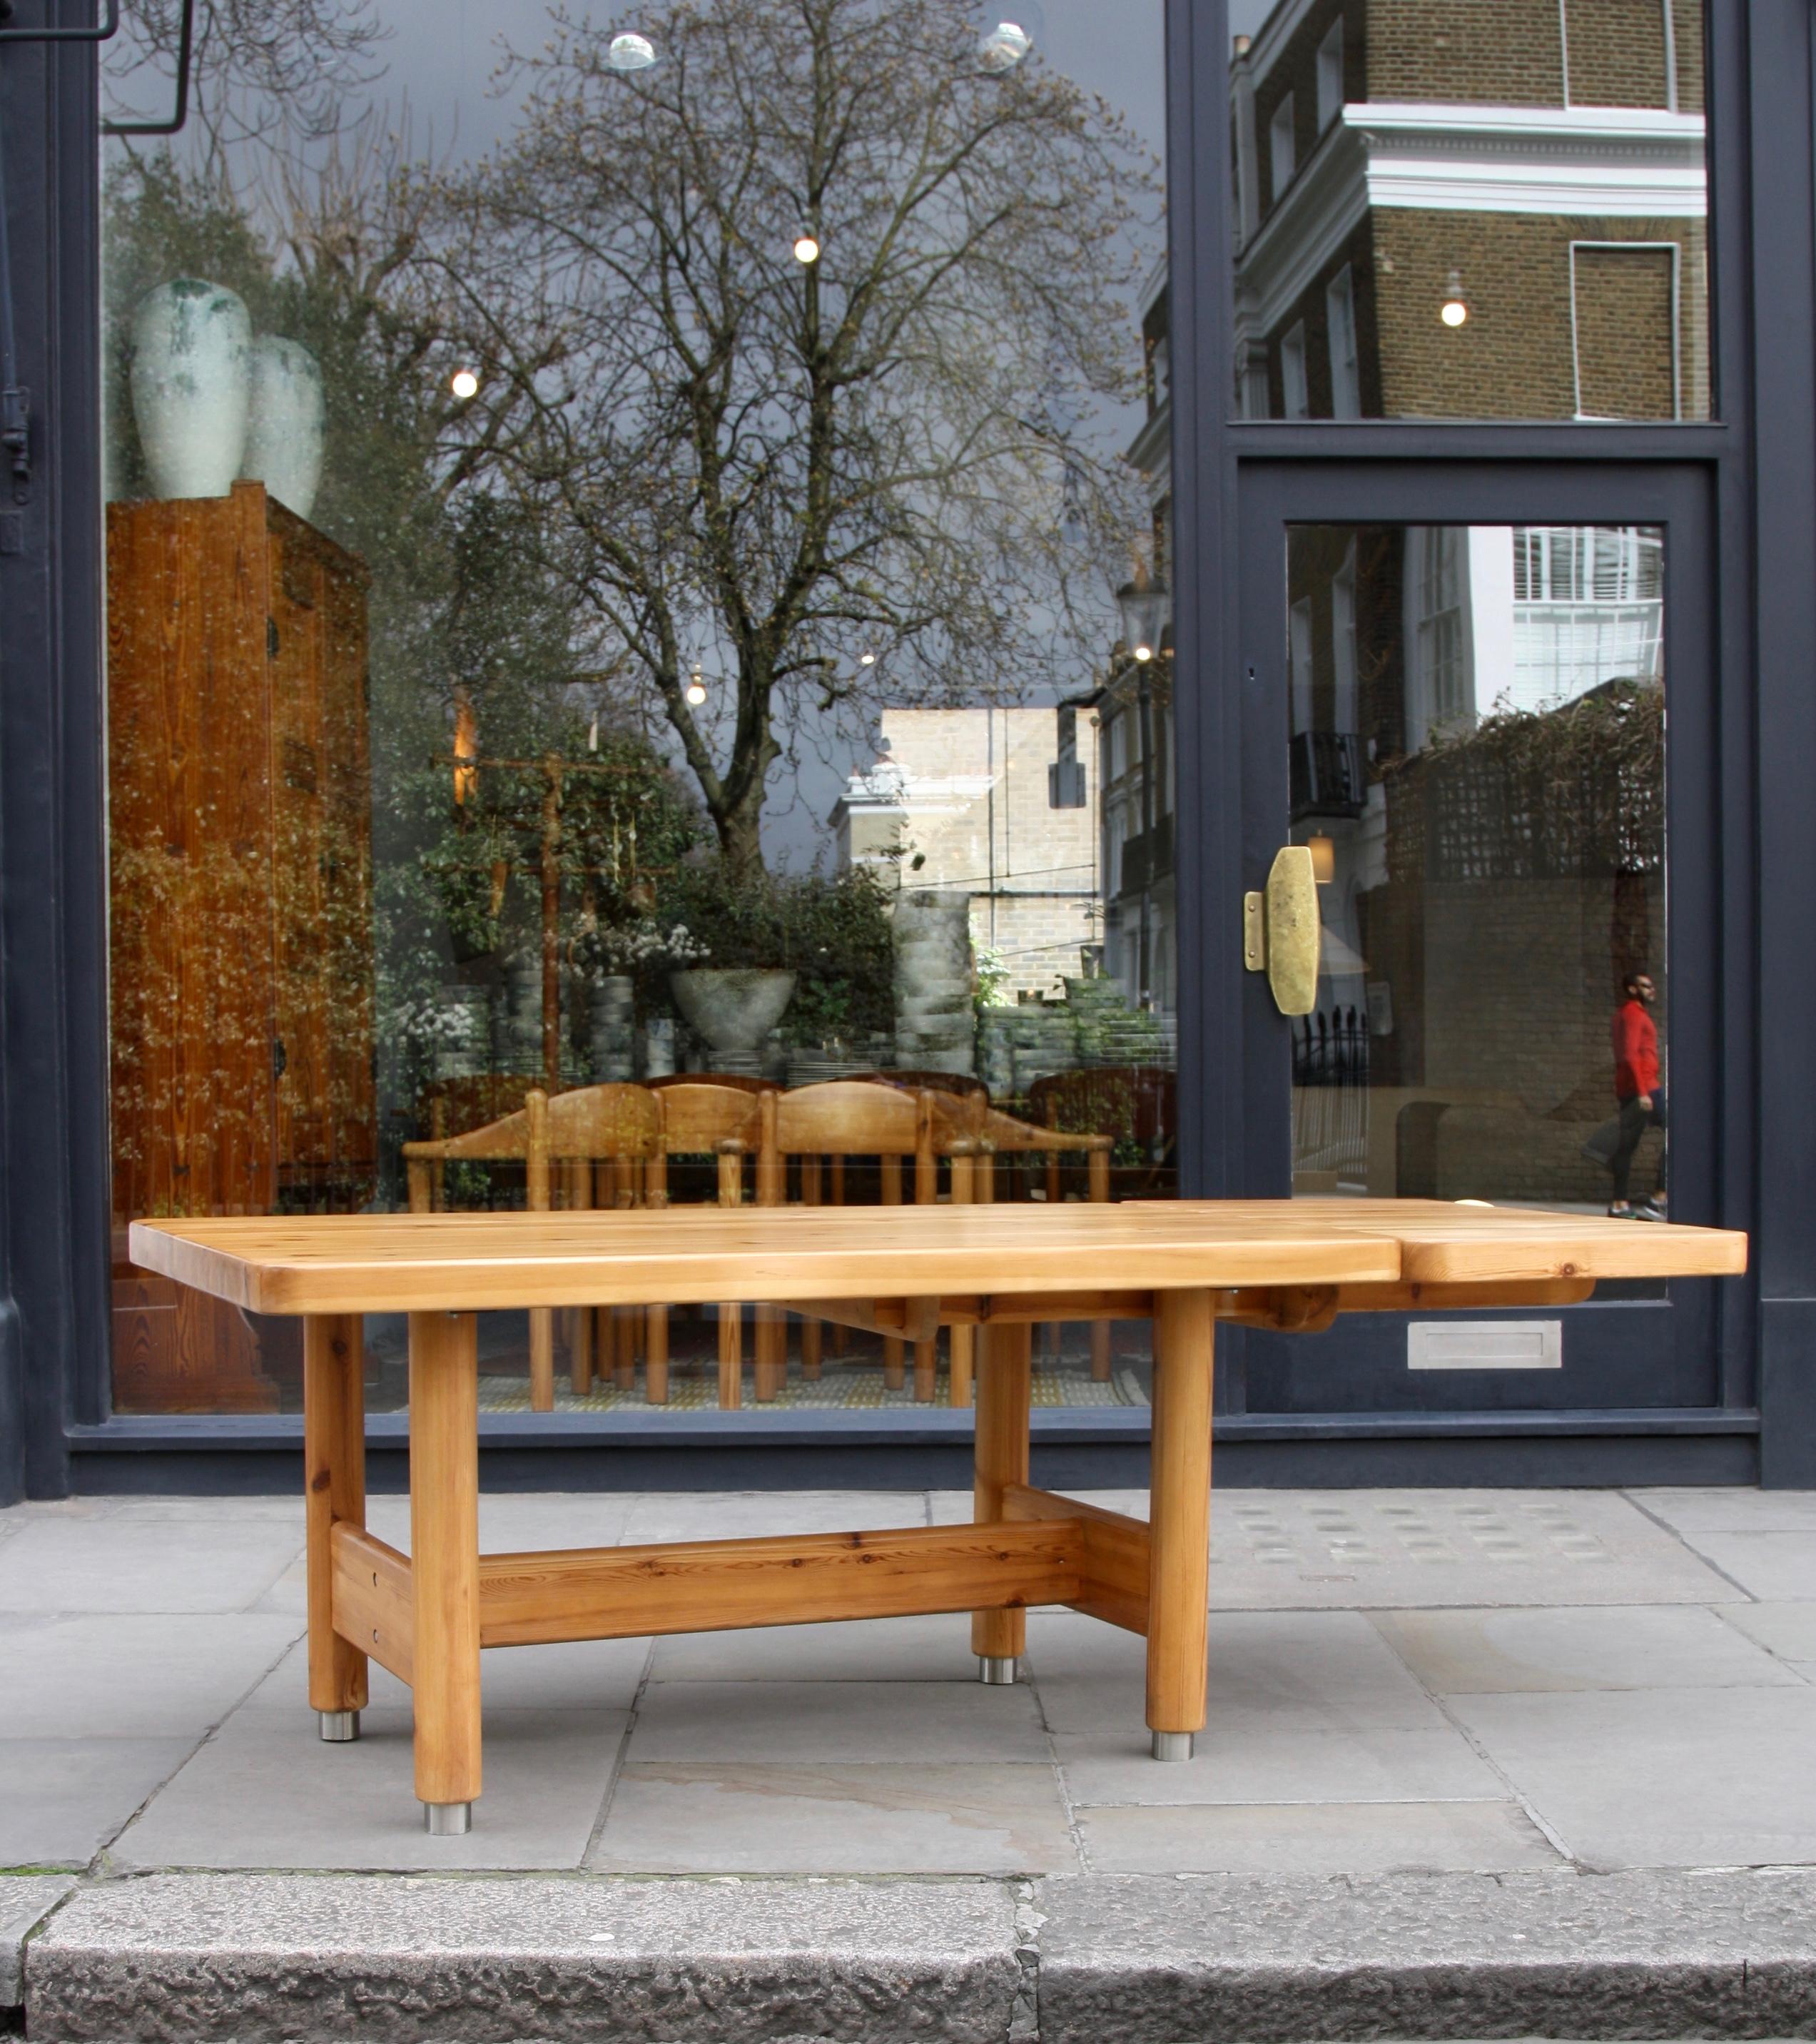 An extendable solid pine table designed and made by Danish architects Knud Friis & Elmar Moltke Nielsen in the 1950s.
Although made of solid wood and being impressive in size and proportions the table has a visual lightness and playfulness. This